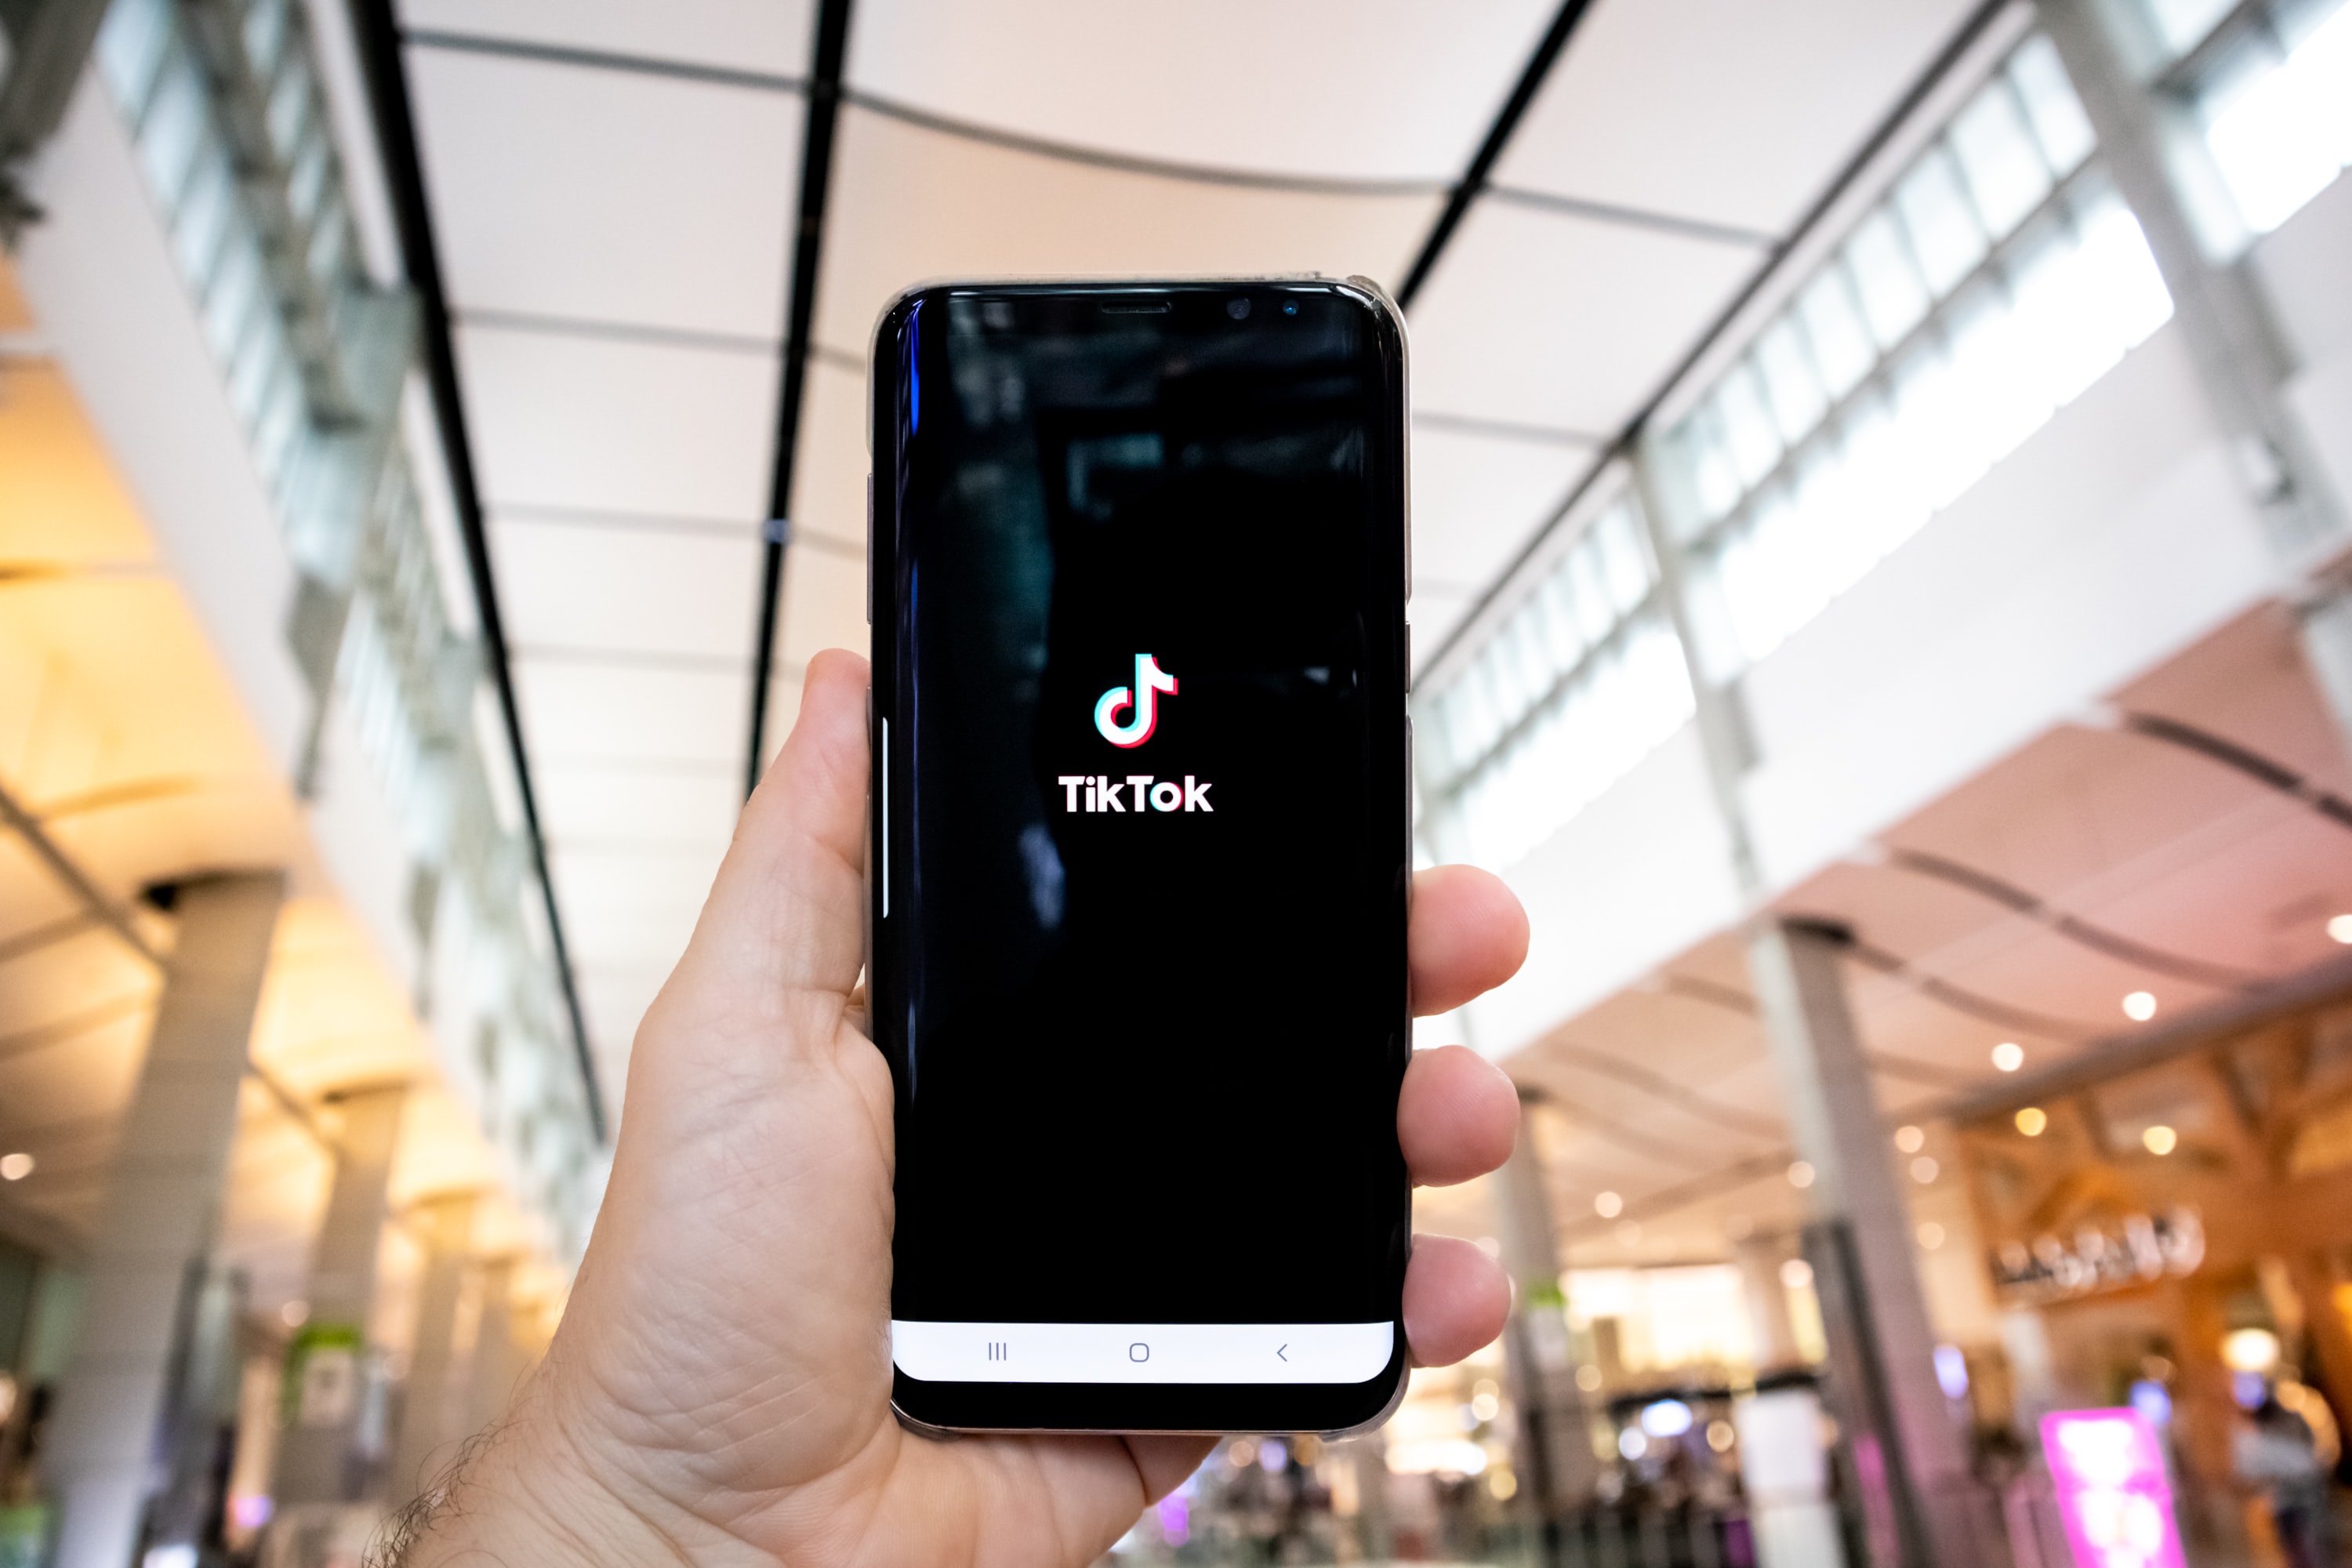  There was a TikTok Android app exploit that let hackers hijack accounts with one click 